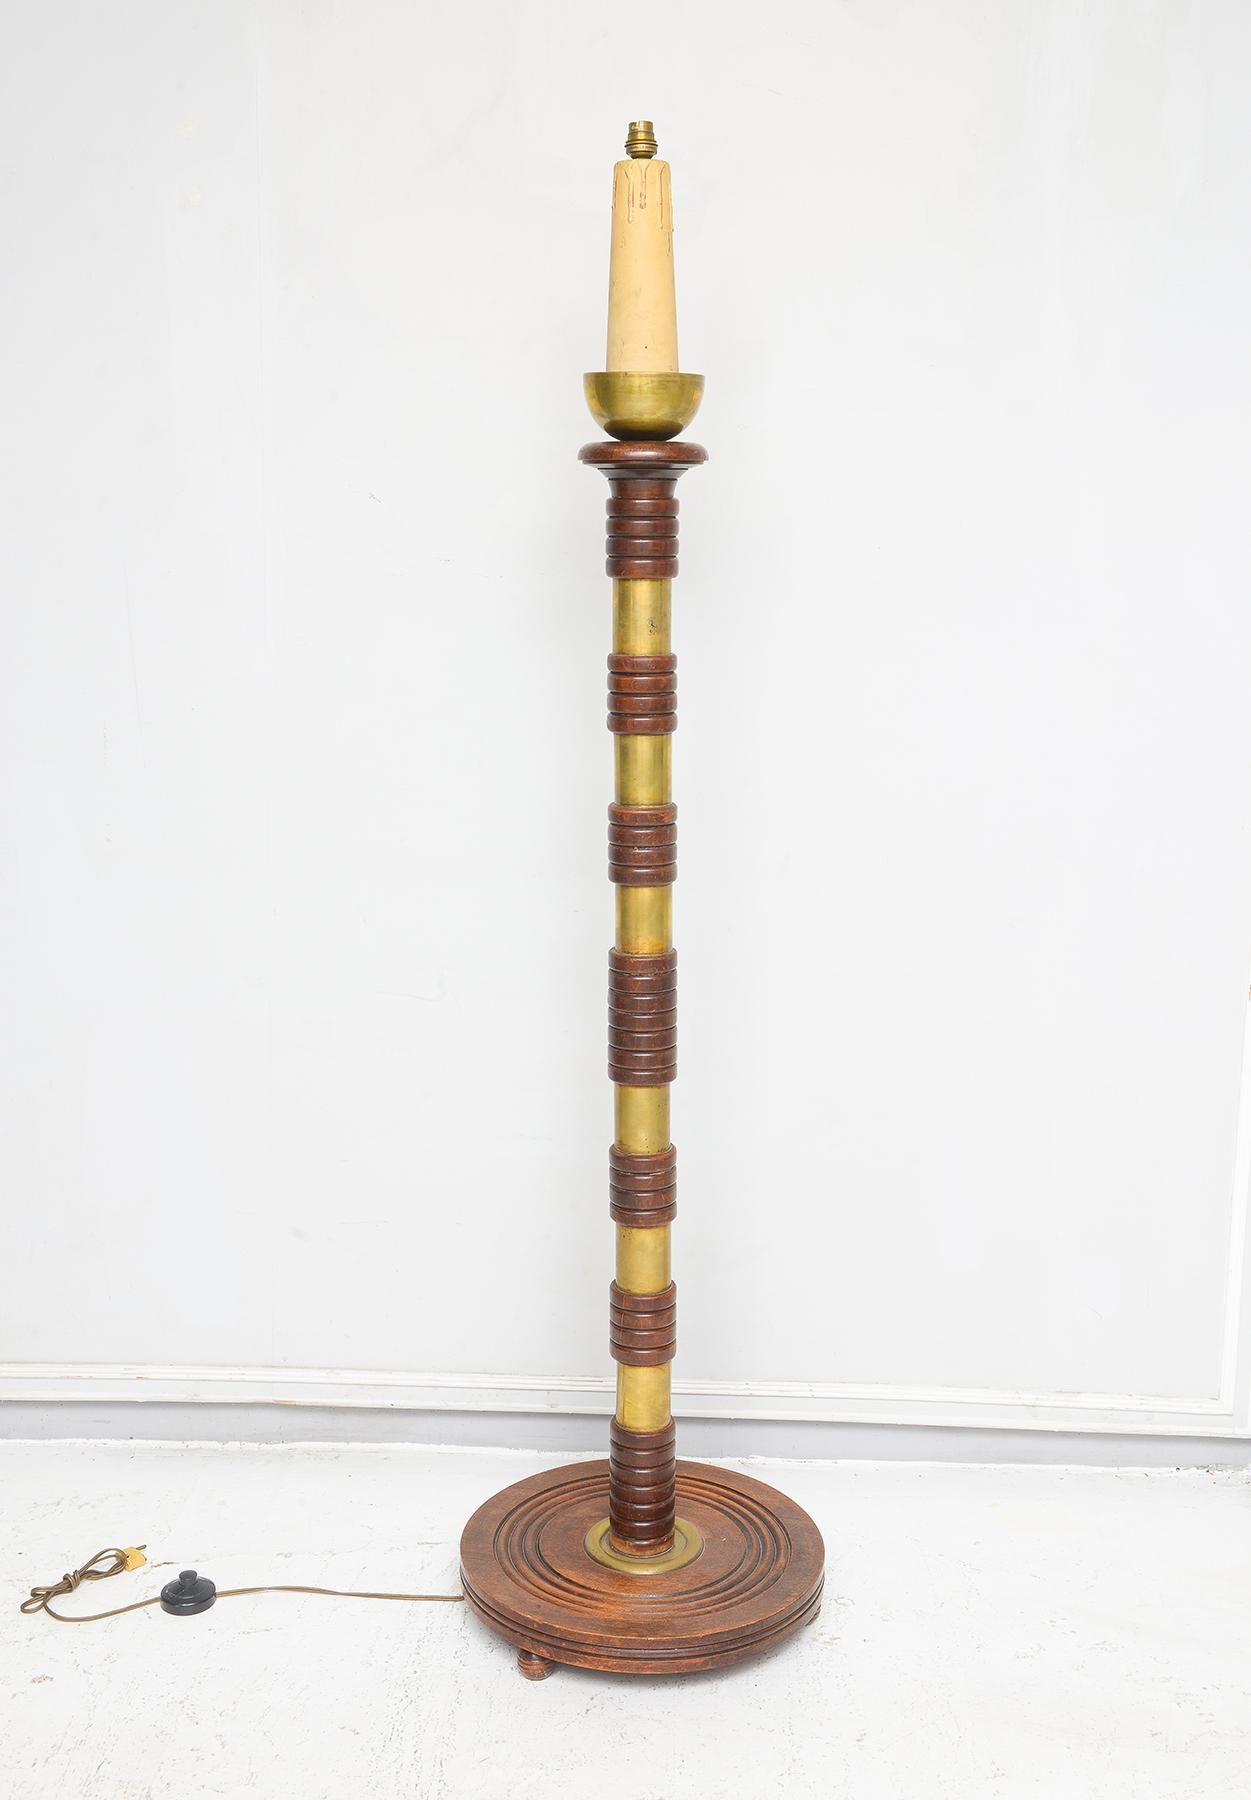 Sculptural French Mid-Century floor lamp with brass rings.
Diameter of the Base is 16